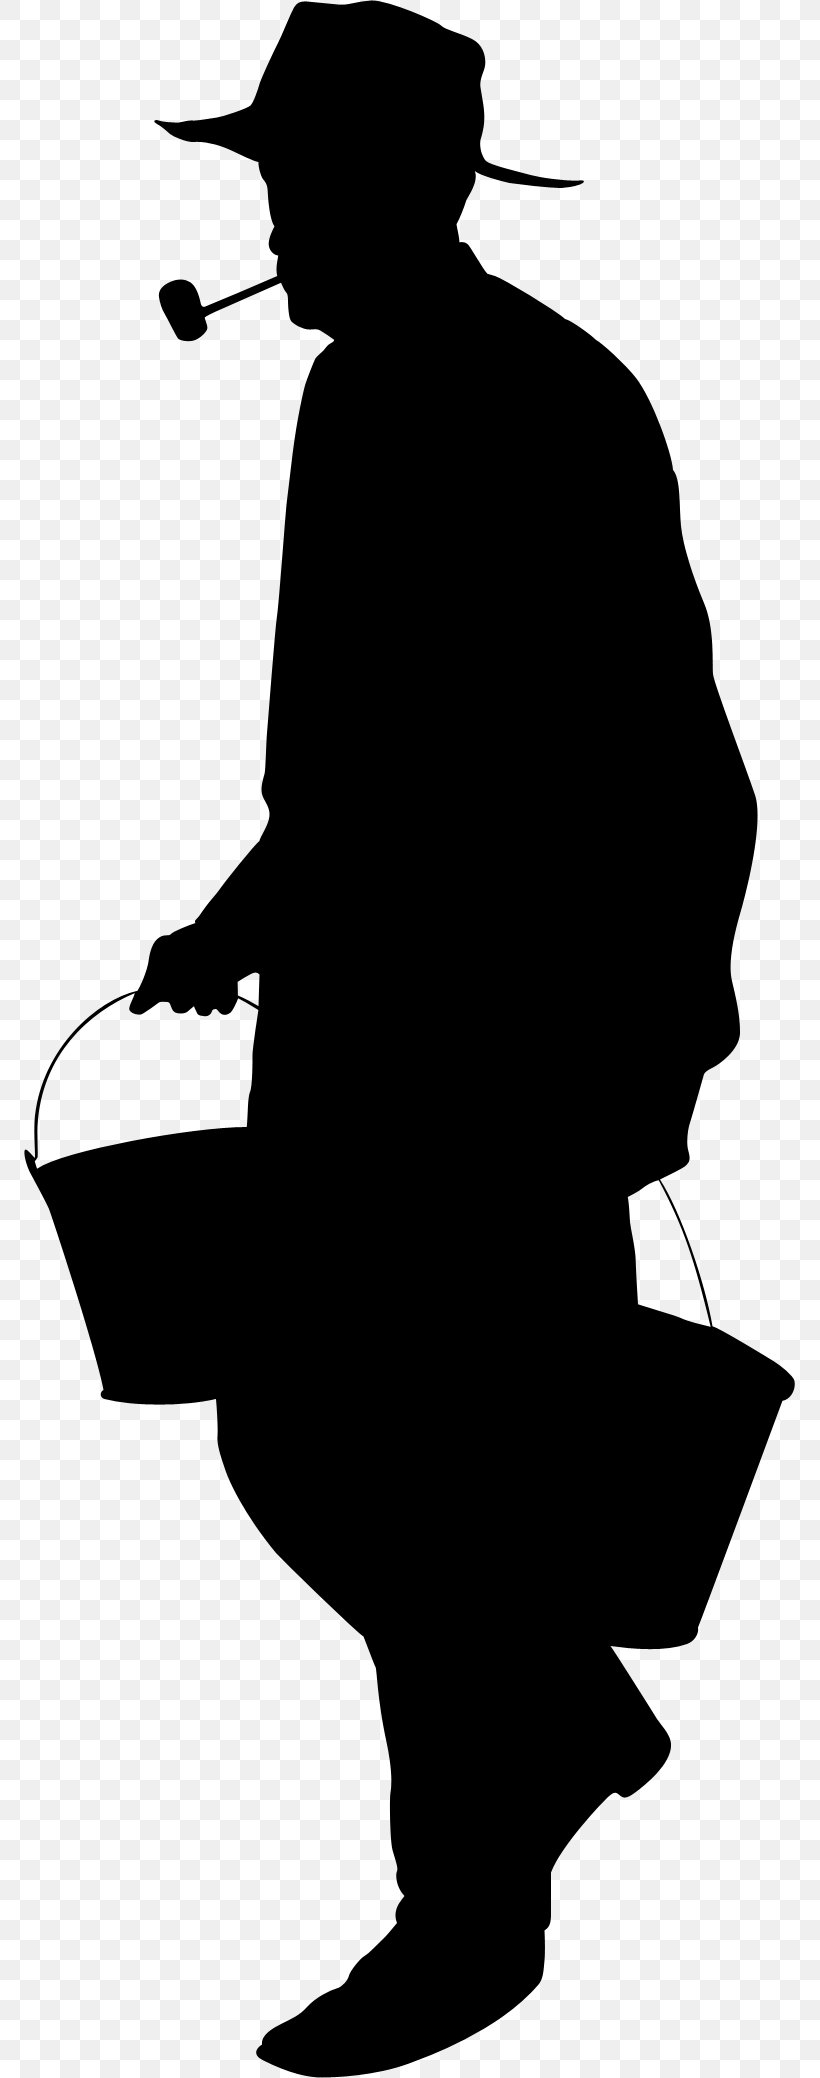 Silhouette Image Clip Art, PNG, 771x2078px, Silhouette, Blackandwhite, Cartoon, Character, Head Download Free